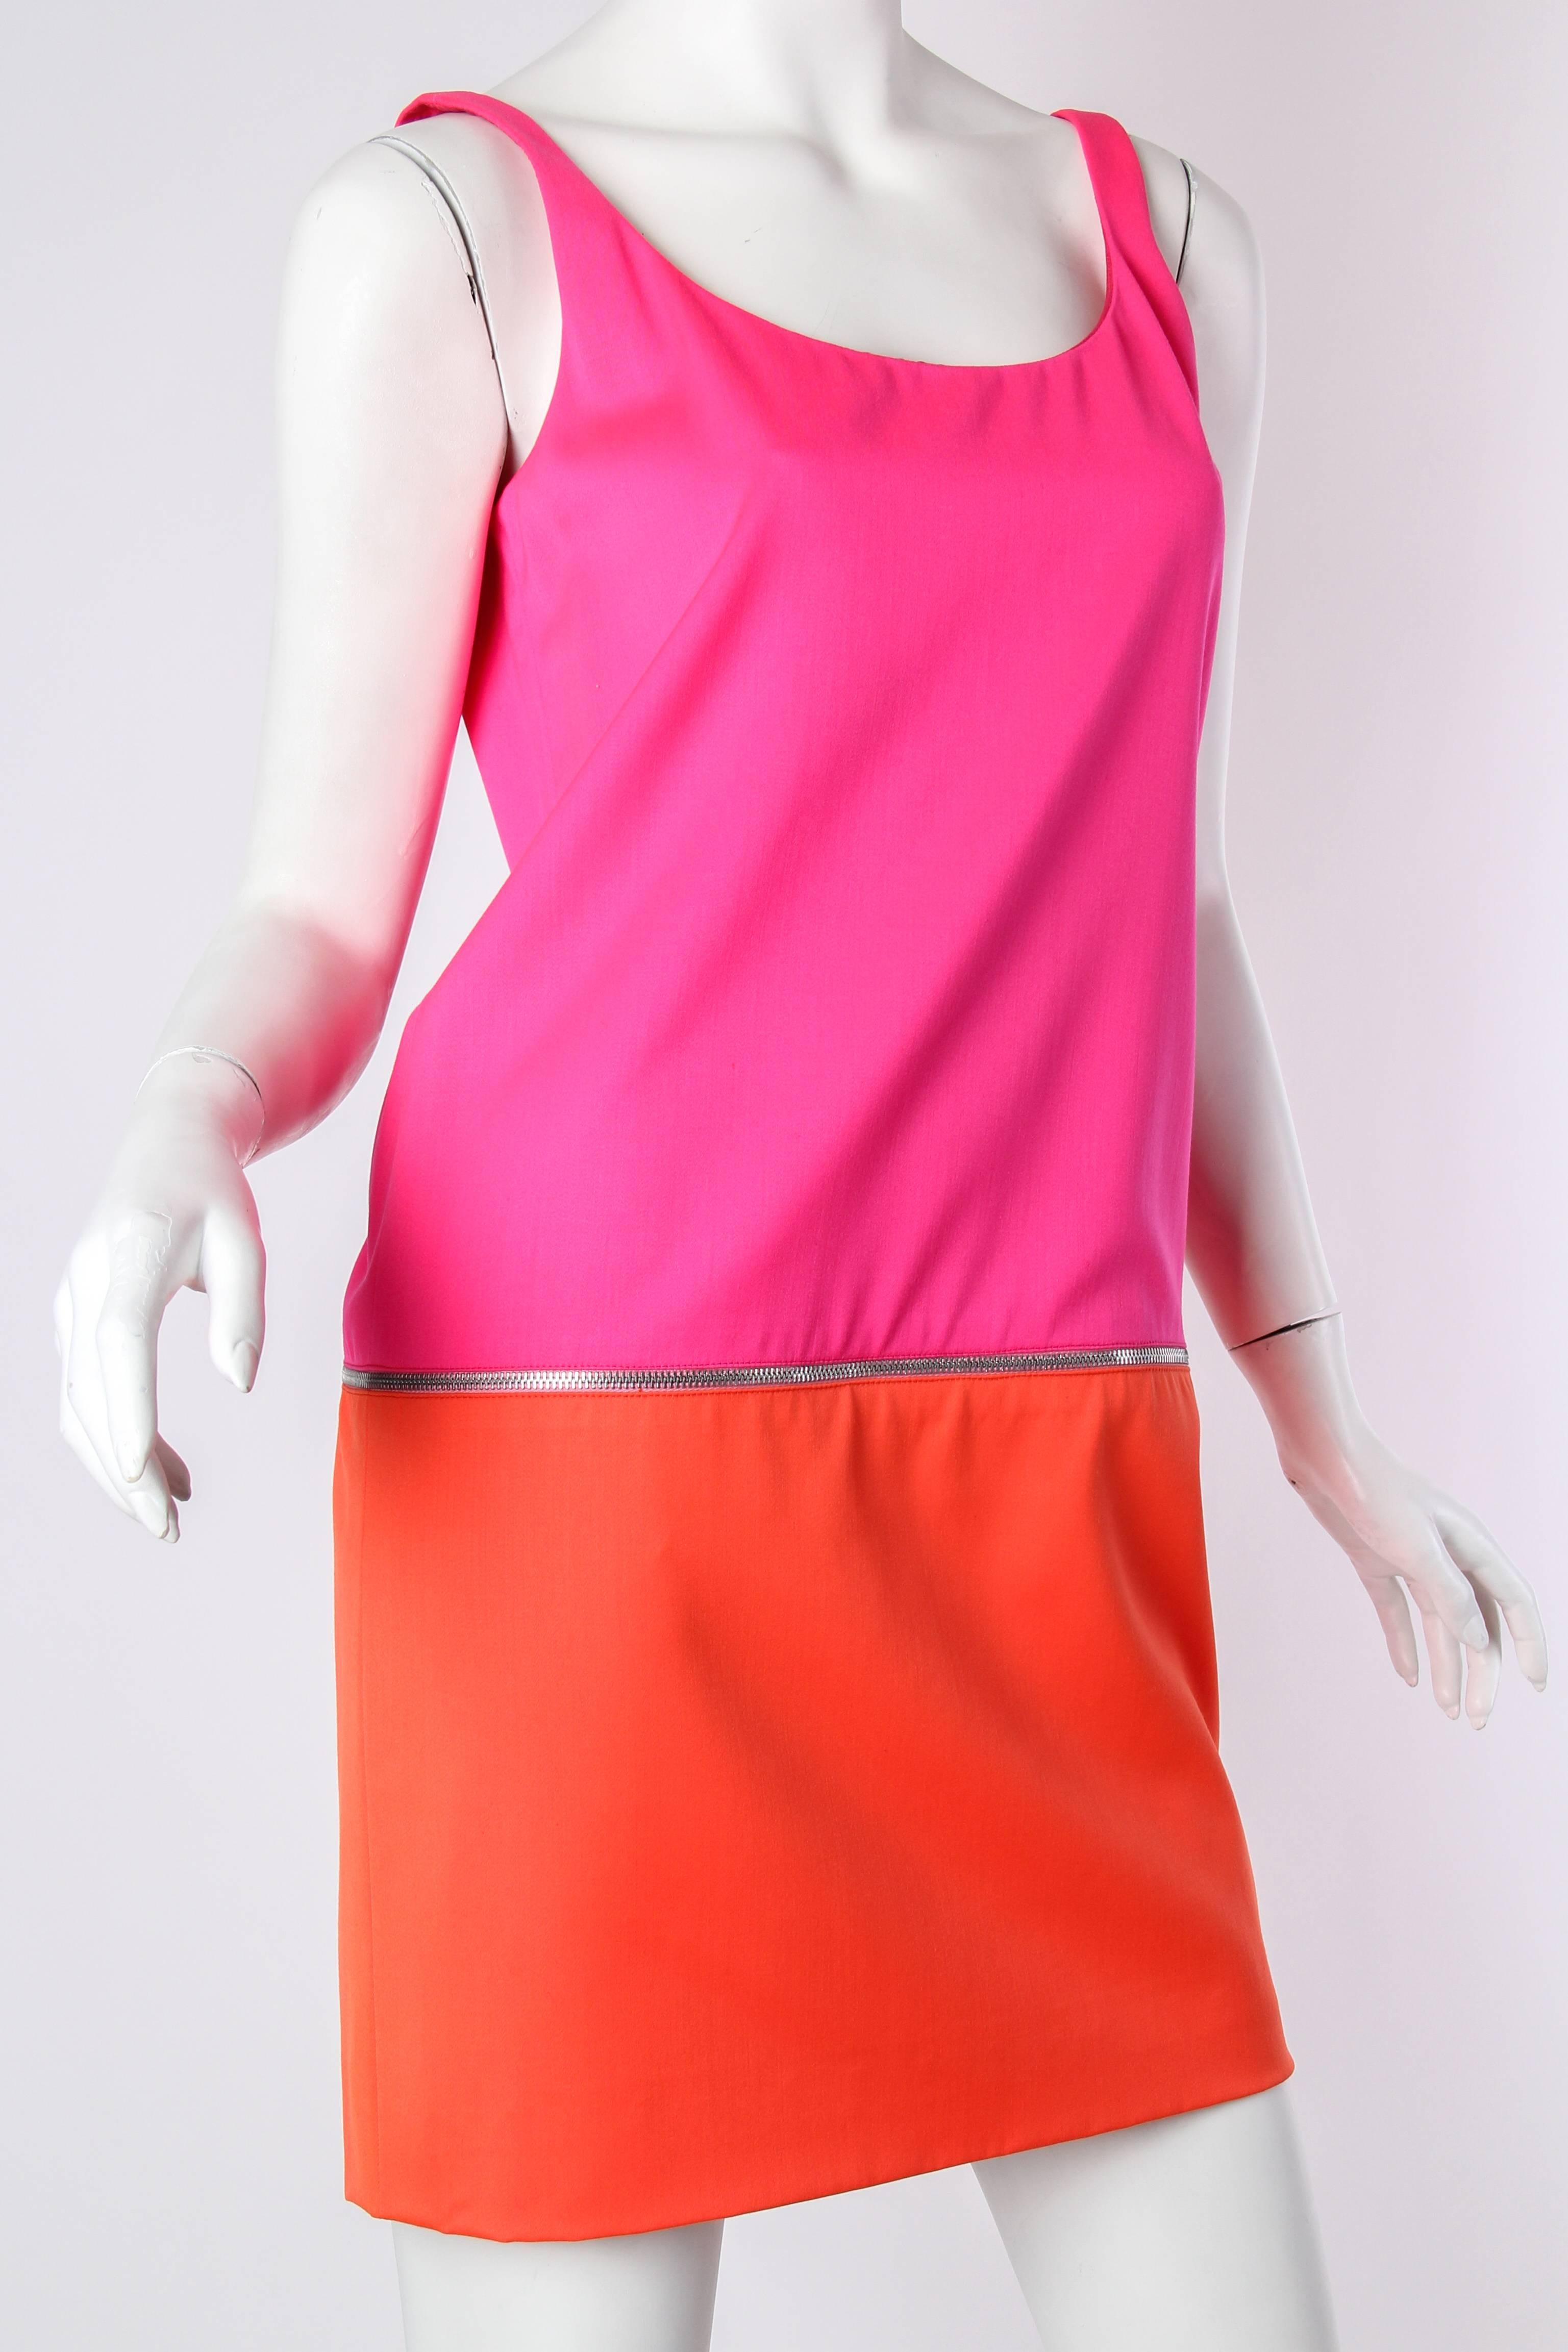 Stephen Sprouse 1980s Ss85 Mod Zipper Dress In Excellent Condition In New York, NY